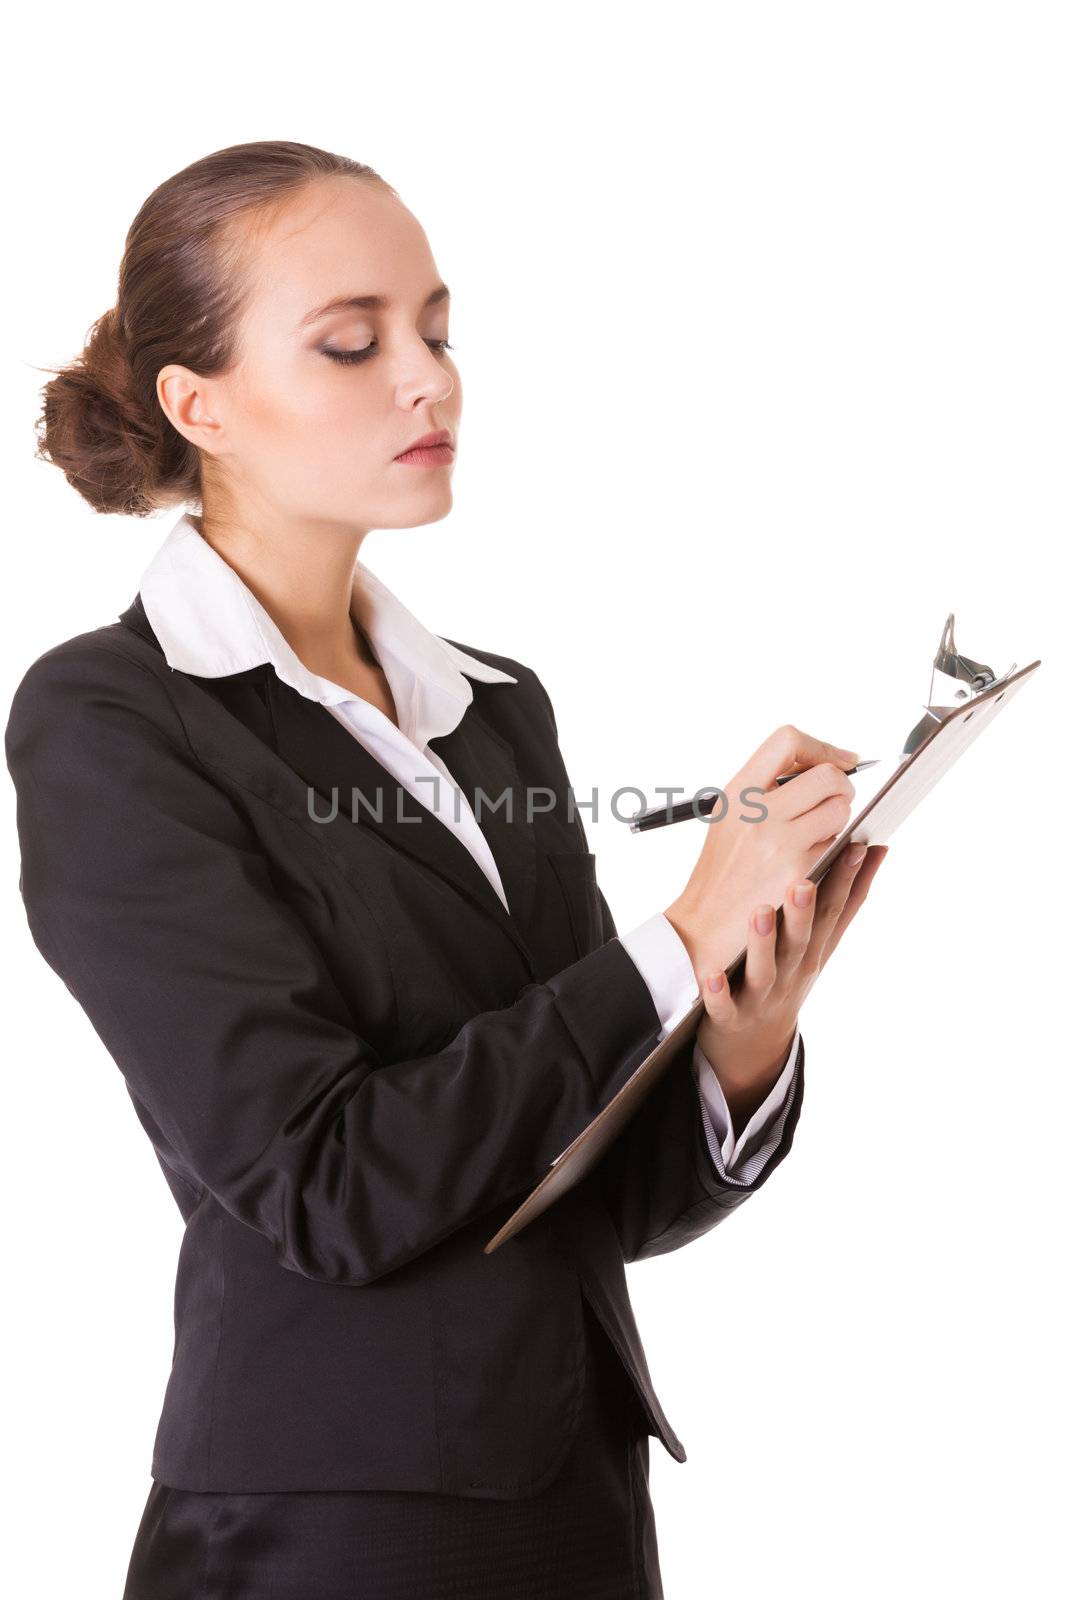 Serious business woman with a clipboard makes notes in document. Isolated on white background.